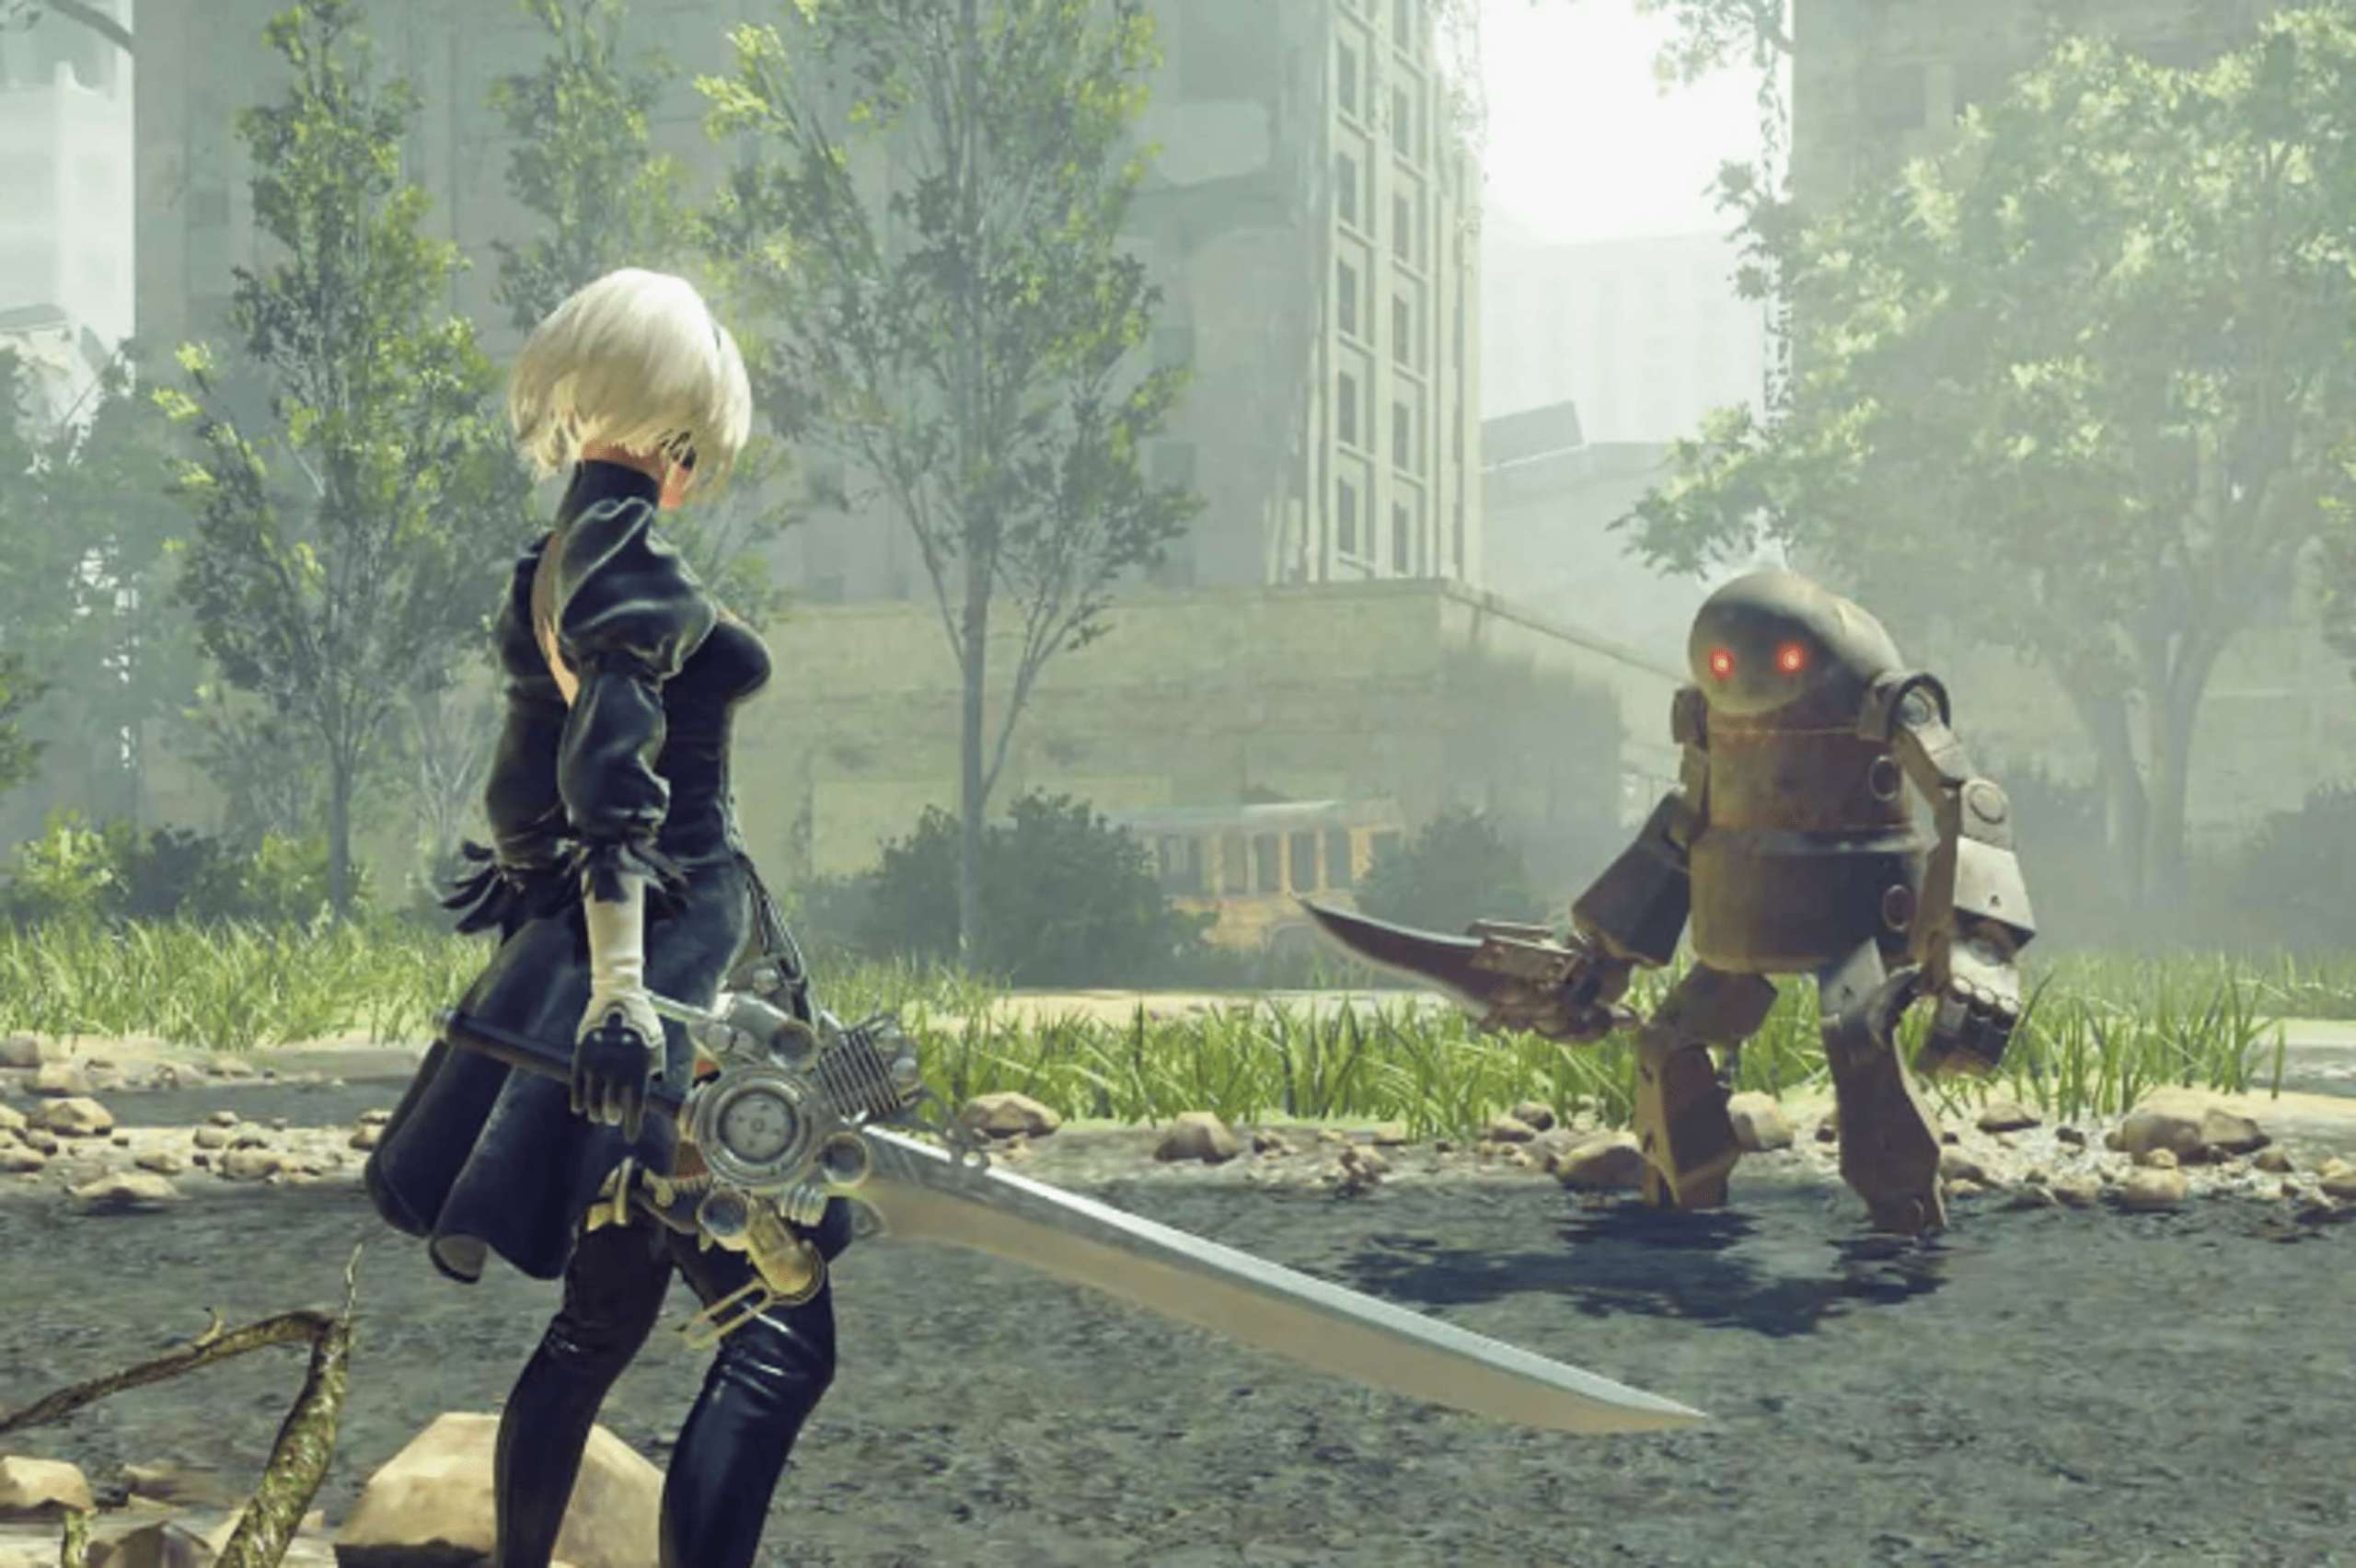 Next Year, You Can Watch An Anime Based On NieR: Automata